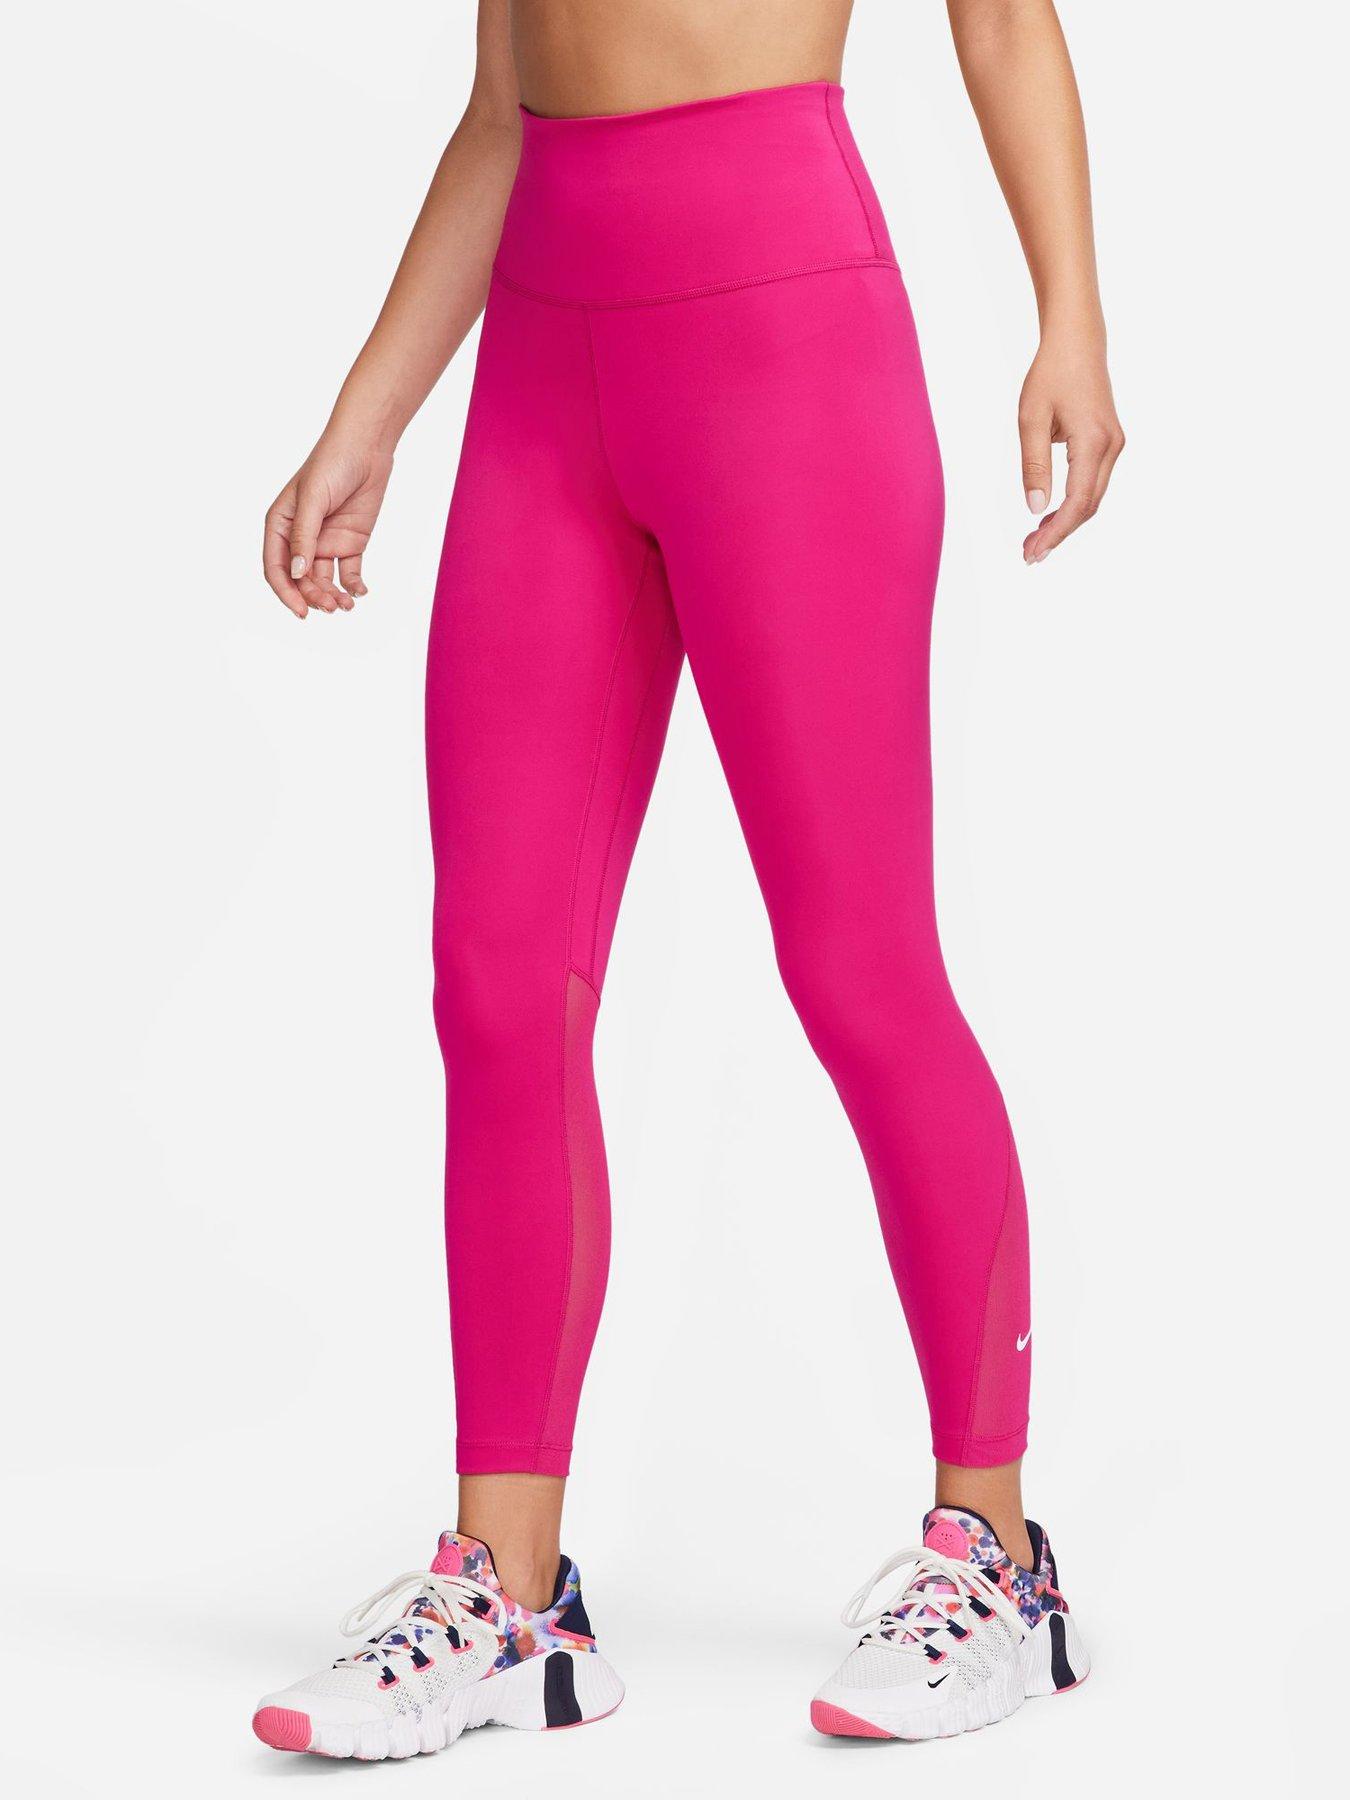 Nike Pro Training Femme Dri-Fit High Rise Leggings In Pink-Red